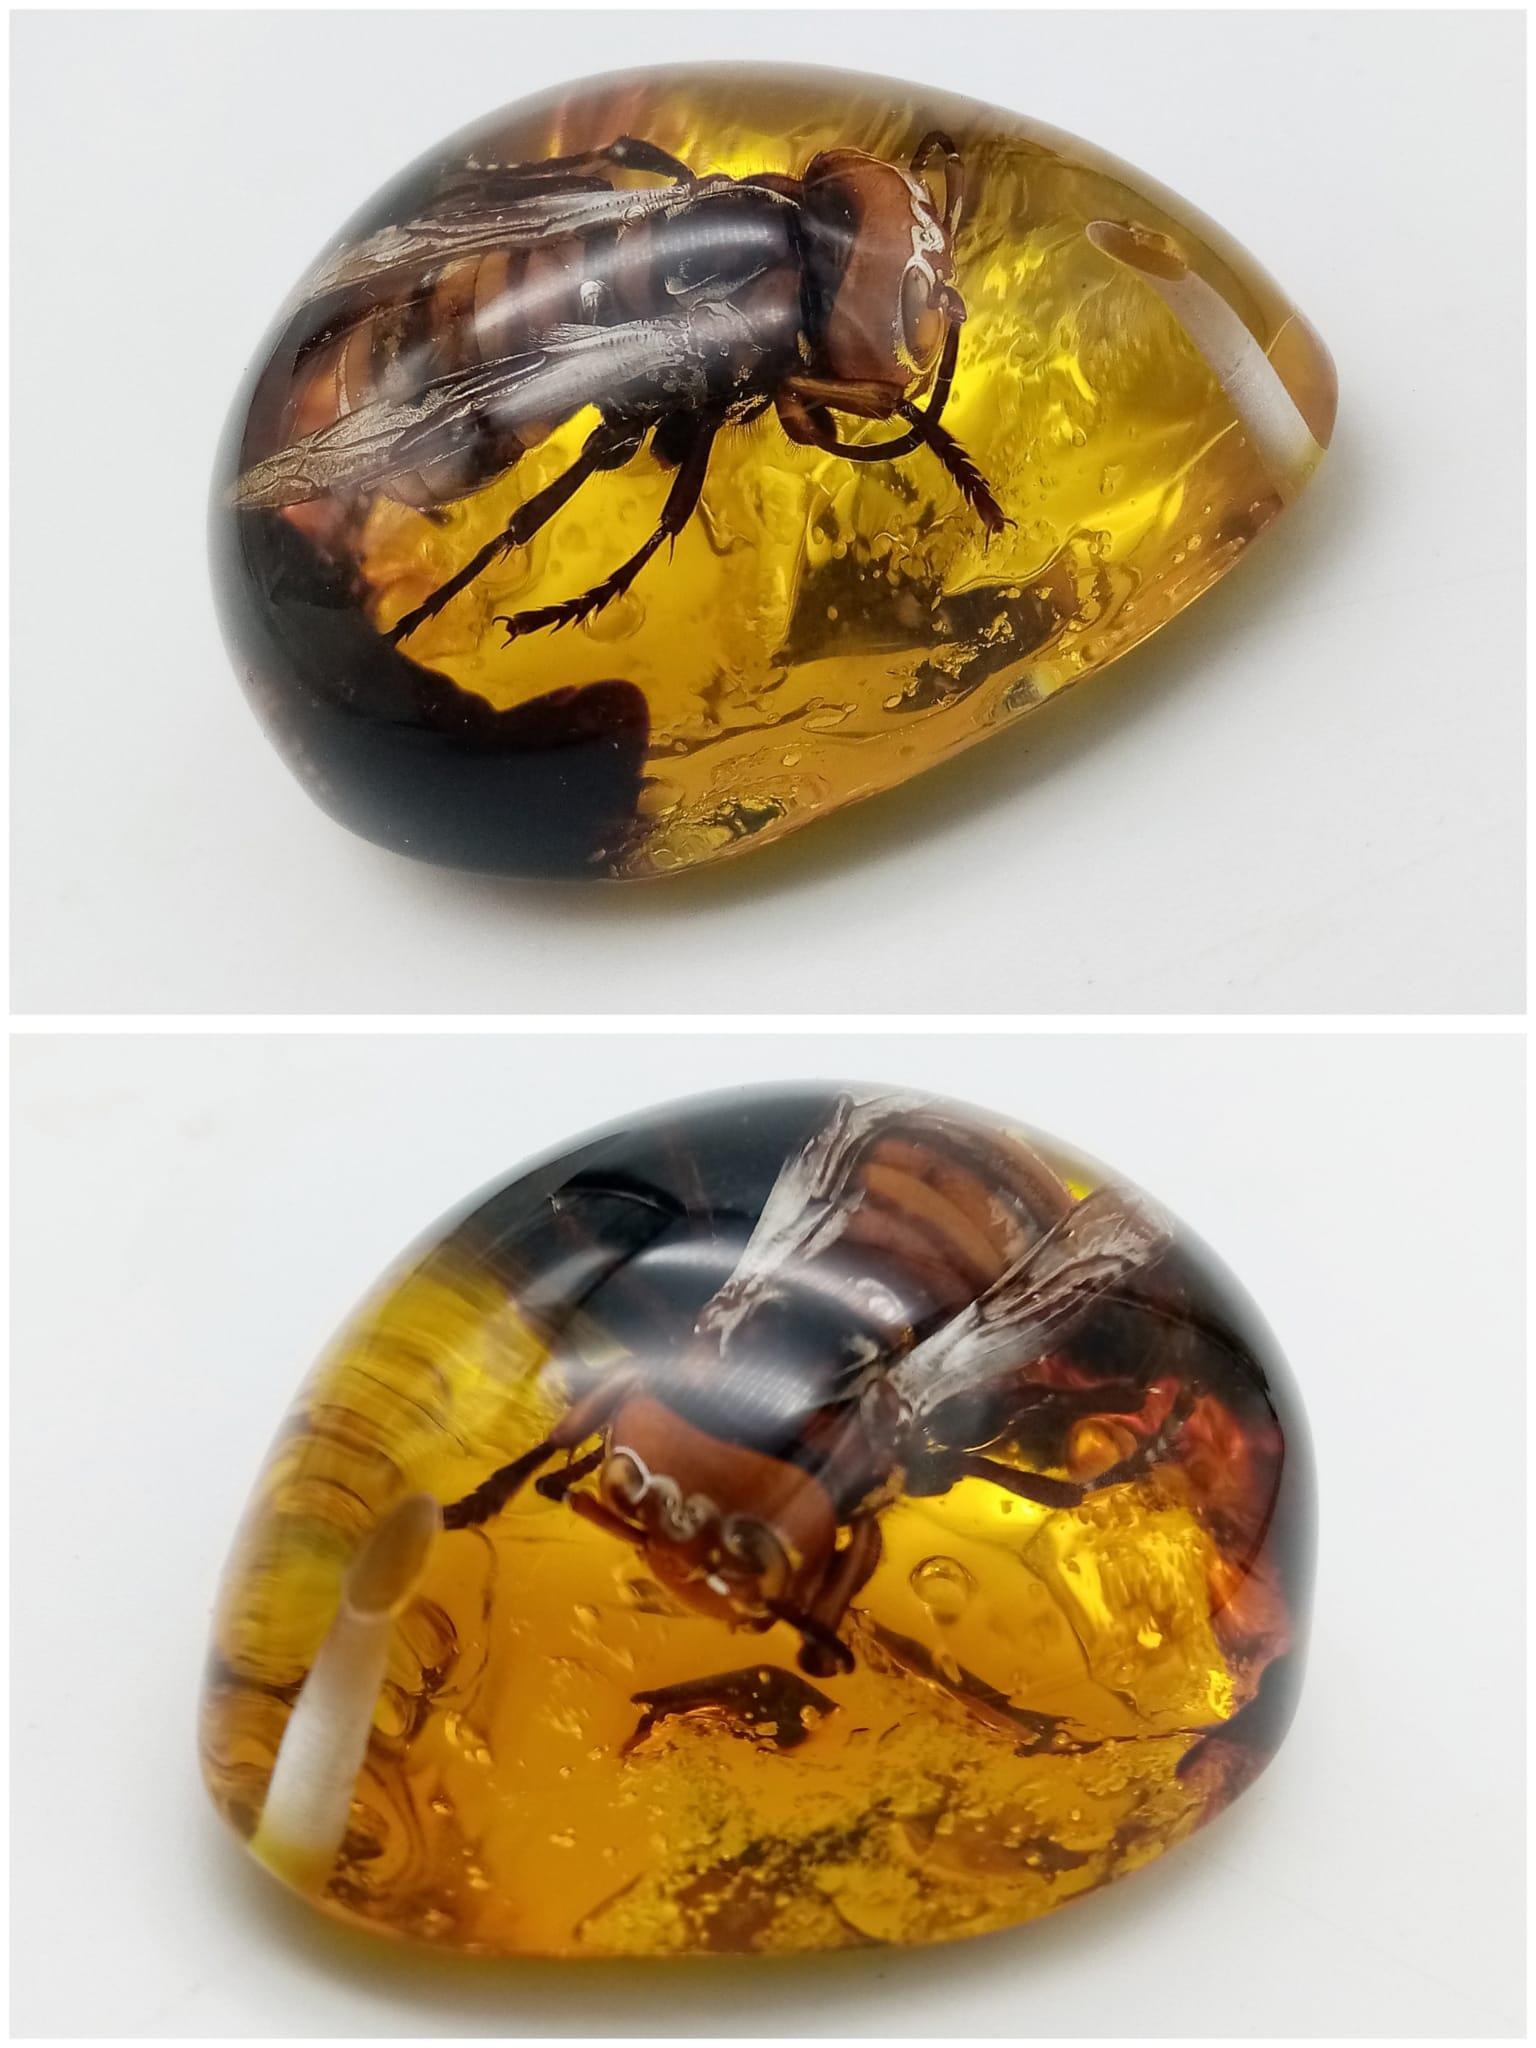 Here's One Asian Hornet That Won't Be Biting the Head off our Bees. Pendant or paperweight. 6cm - Image 2 of 3